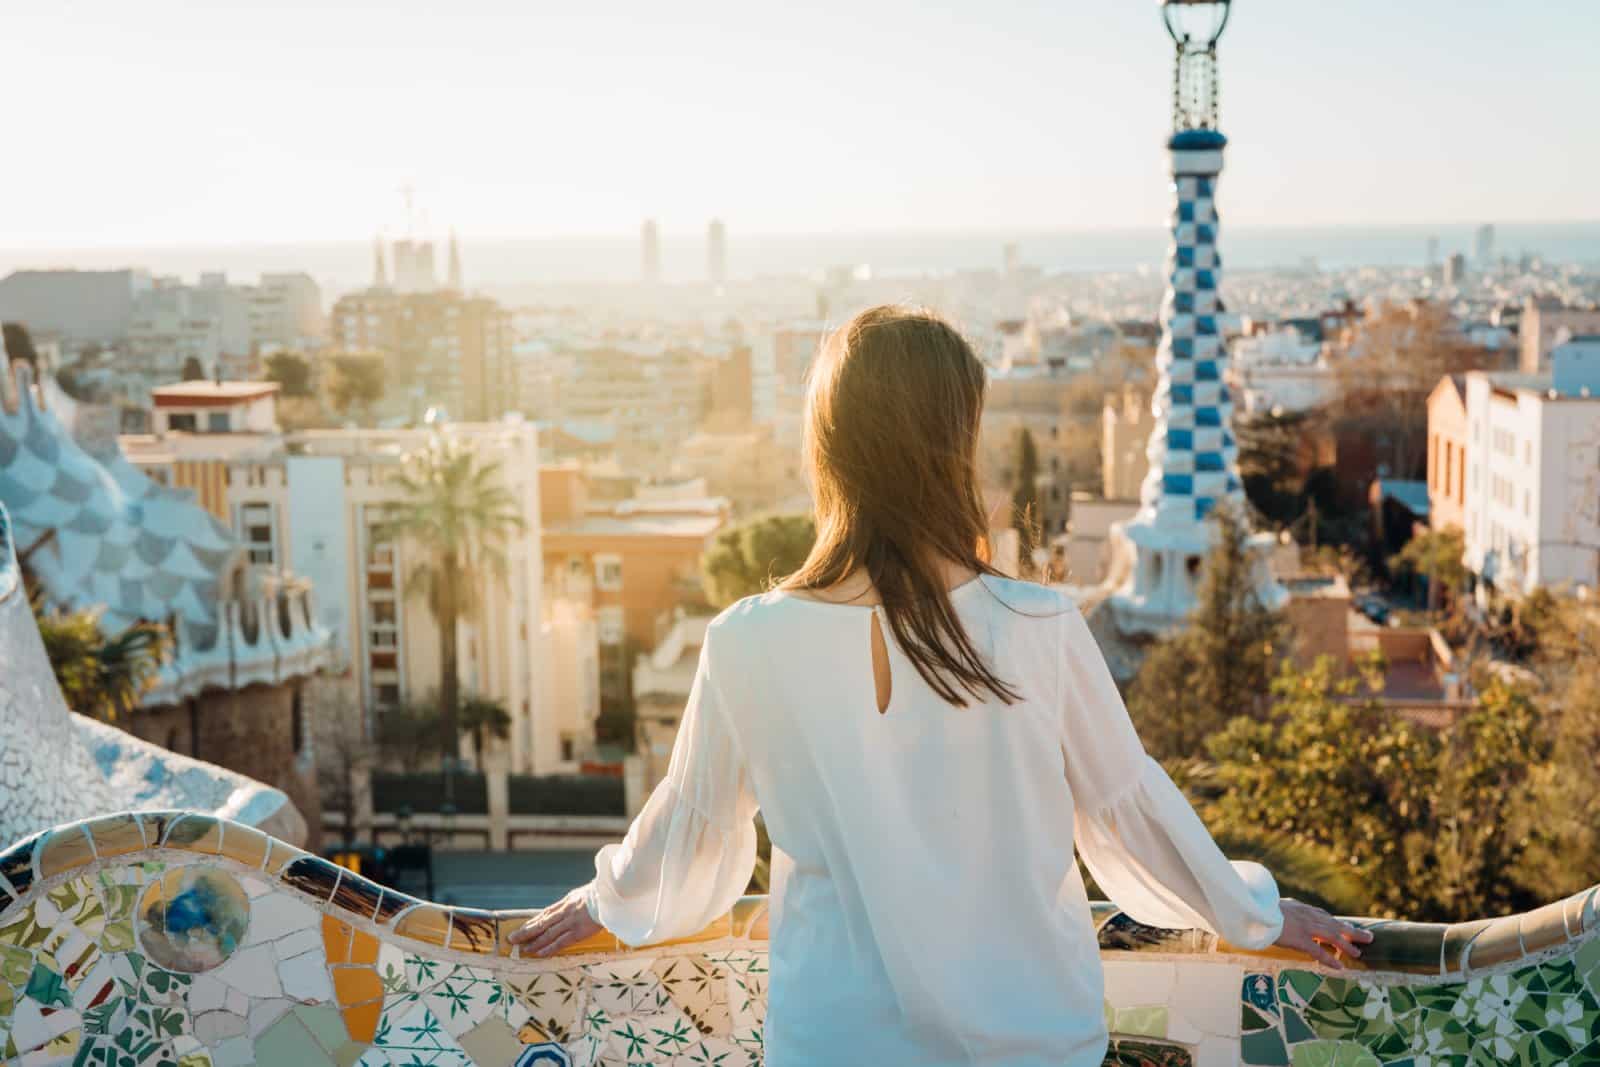 Image Credit: Shutterstock / eldar nurkovic <p><span>Barcelona combines a rich cultural heritage with a lively contemporary LGBTQ+ scene. The city’s Eixample district, known locally as “Gaixample,” is home to a vibrant community, with LGBTQ+ bars, clubs, and shops dotting its grid-like streets. Barcelona Pride and the Circuit Festival are major annual events that celebrate the city’s diversity with parades, parties, and cultural activities. Barcelona’s architecture, Mediterranean beaches, and gastronomy offer a well-rounded travel experience.</span></p> <p><b>Insider’s Tip: </b><span>For a more local LGBTQ+ beach experience, head to Mar Bella beach, known for its welcoming atmosphere and beachside chiringuito bars.</span></p> <p><b>When to Travel: </b><span>June for Barcelona Pride or August for the Circuit Festival, though the city’s appeal is year-round, with a mild Mediterranean climate.</span></p> <p><b>How to Get There: </b><span>Barcelona-El Prat Airport serves as the city’s main international gateway, with excellent public transport links to the city center.</span></p>